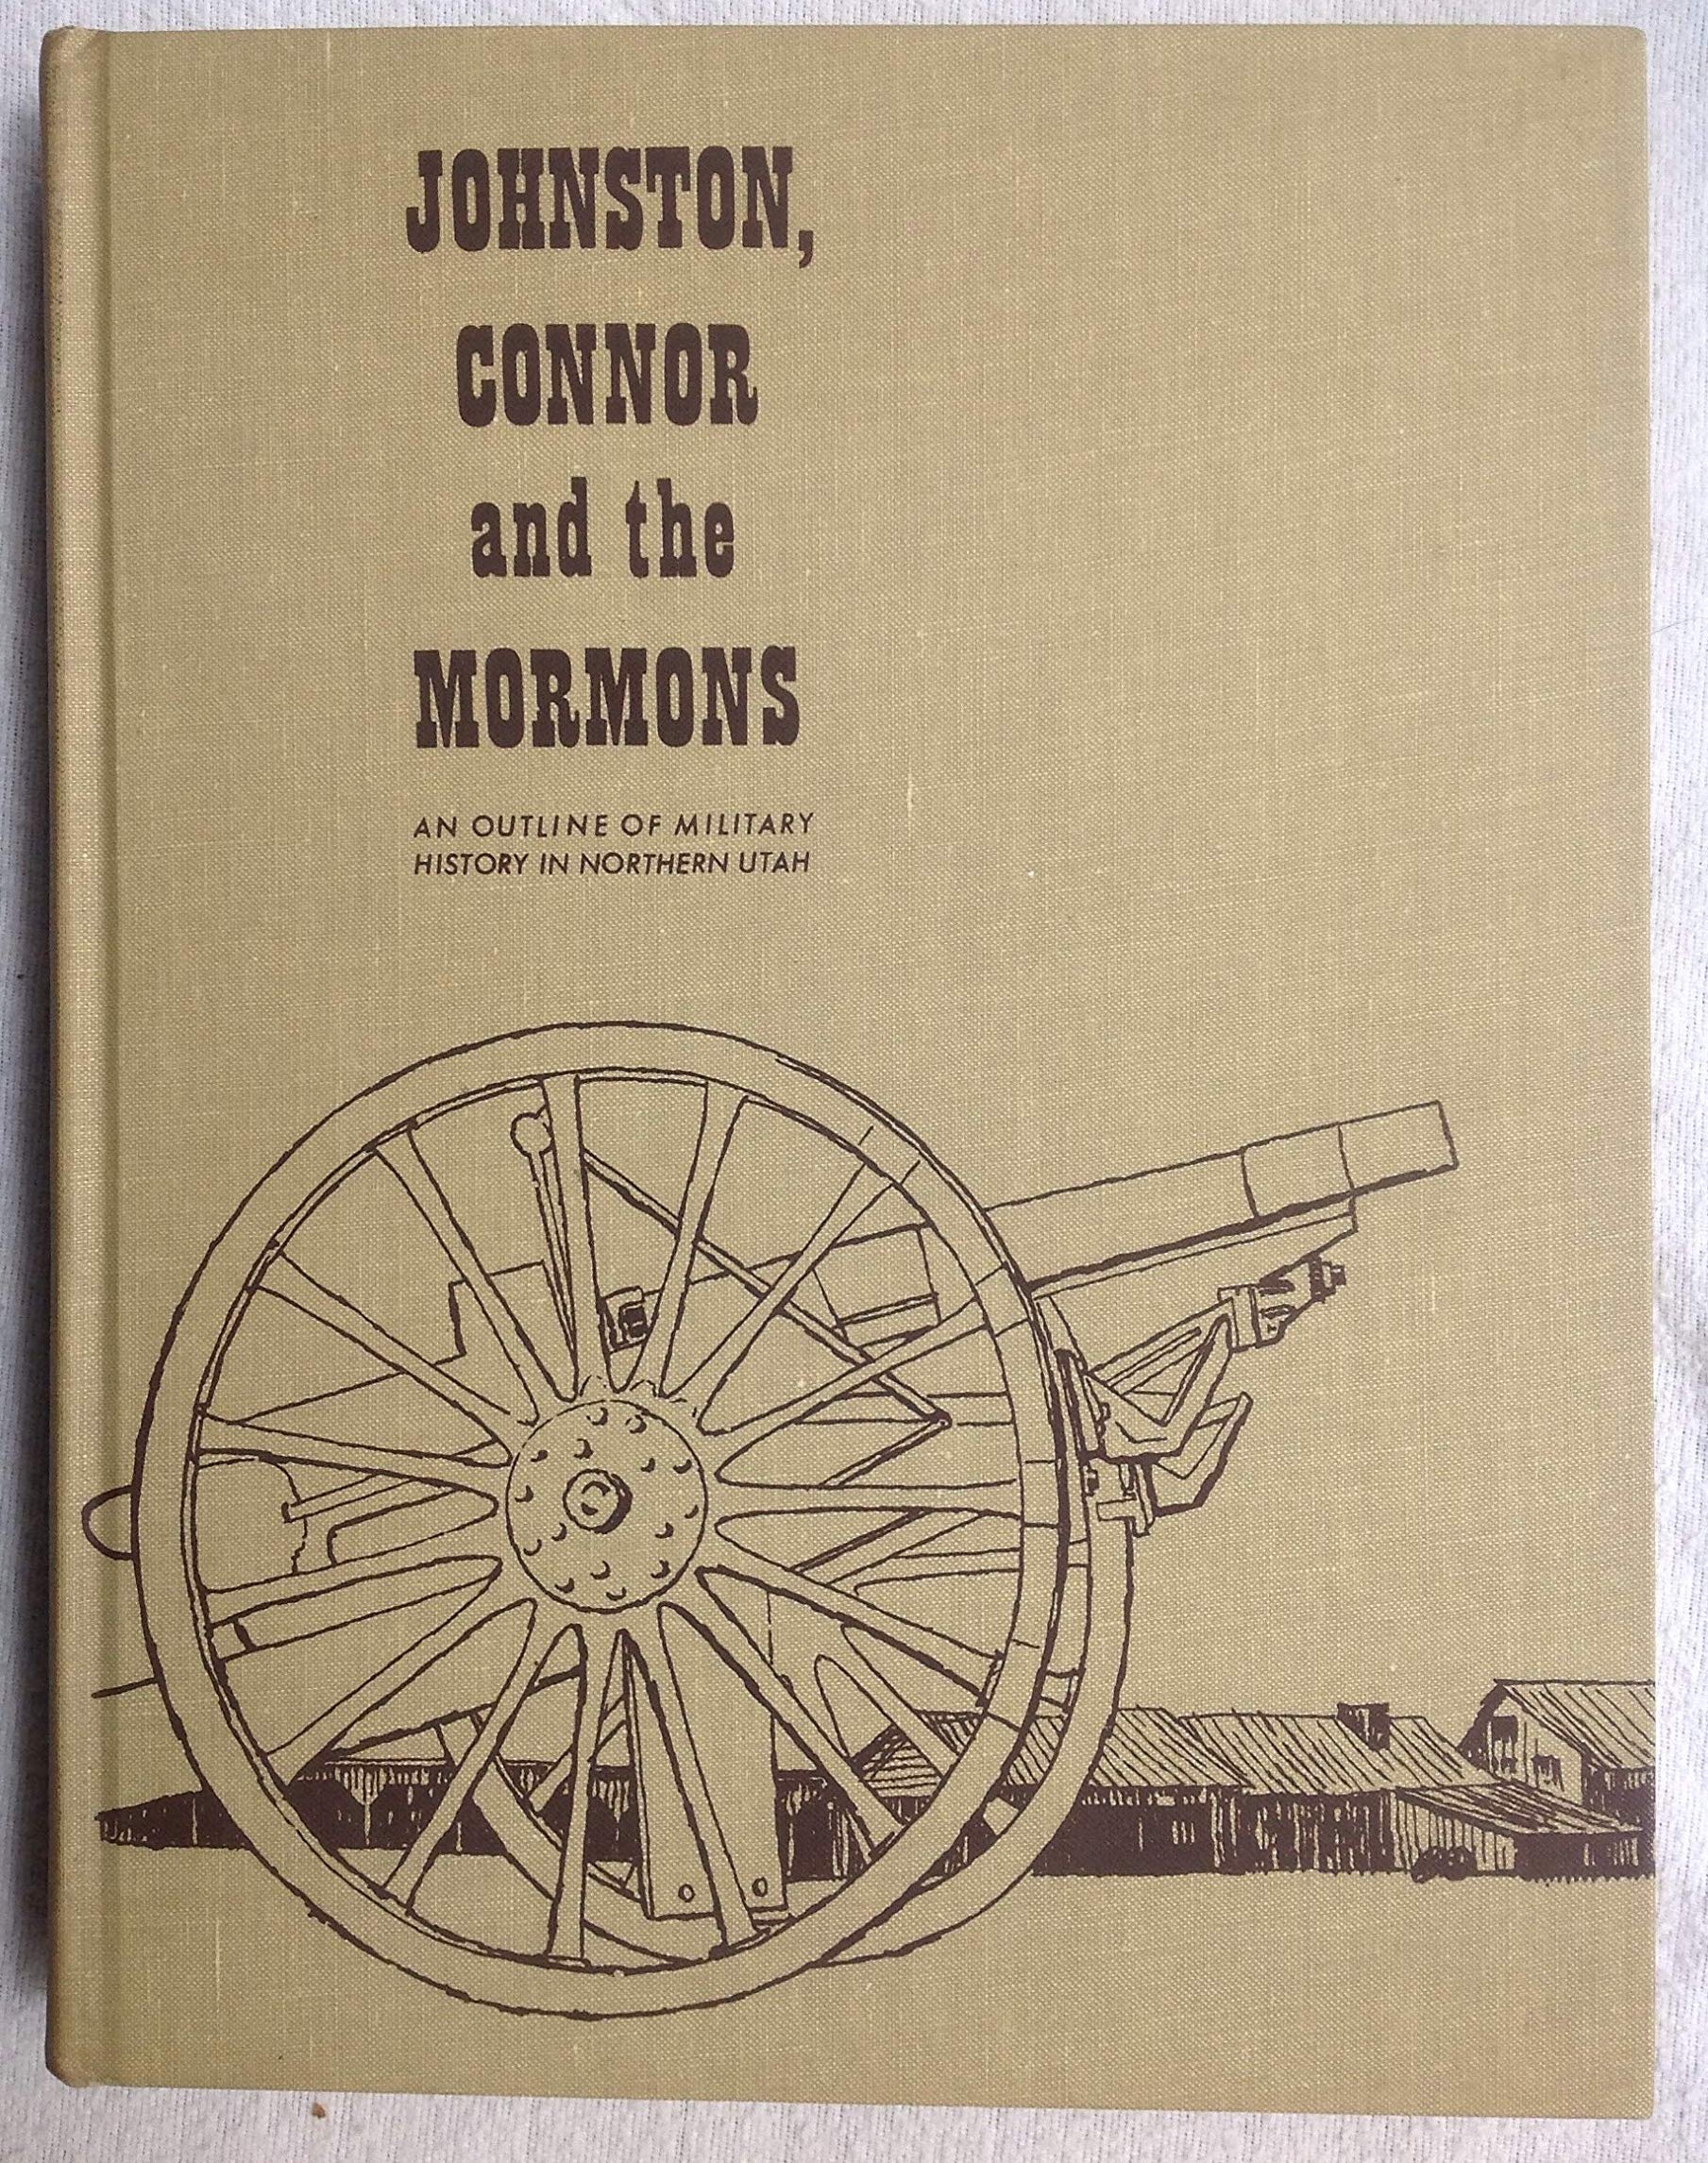 Johnston, Connor, and the Mormons: An outline of military history in Northern Utah (book cover)